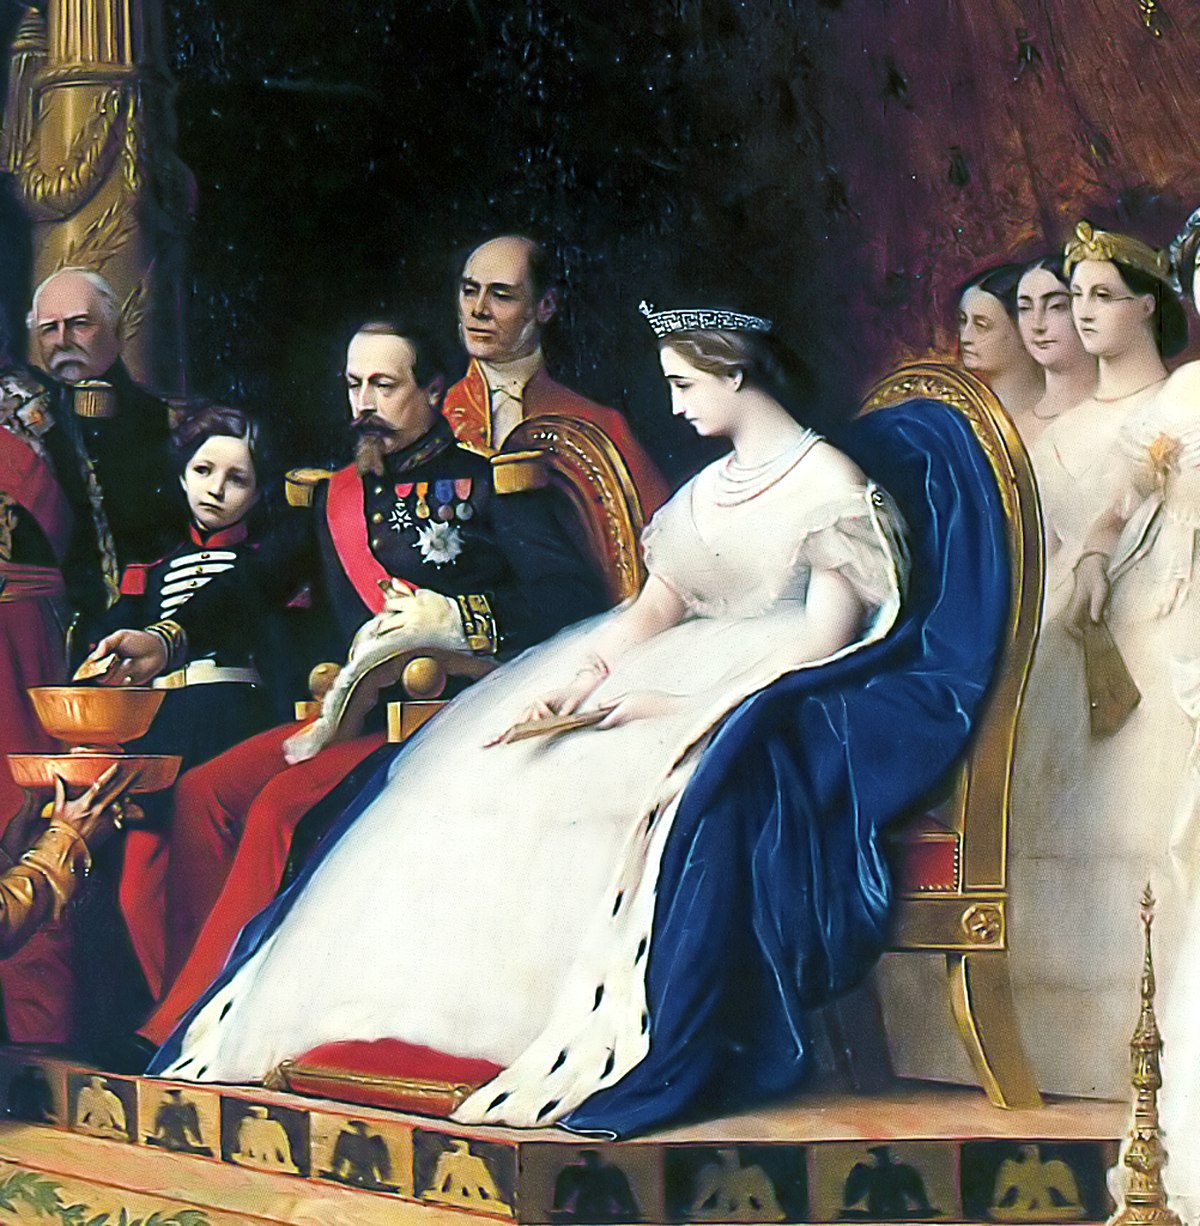 File:Empress Eugenie of the French.jpg - Wikimedia Commons